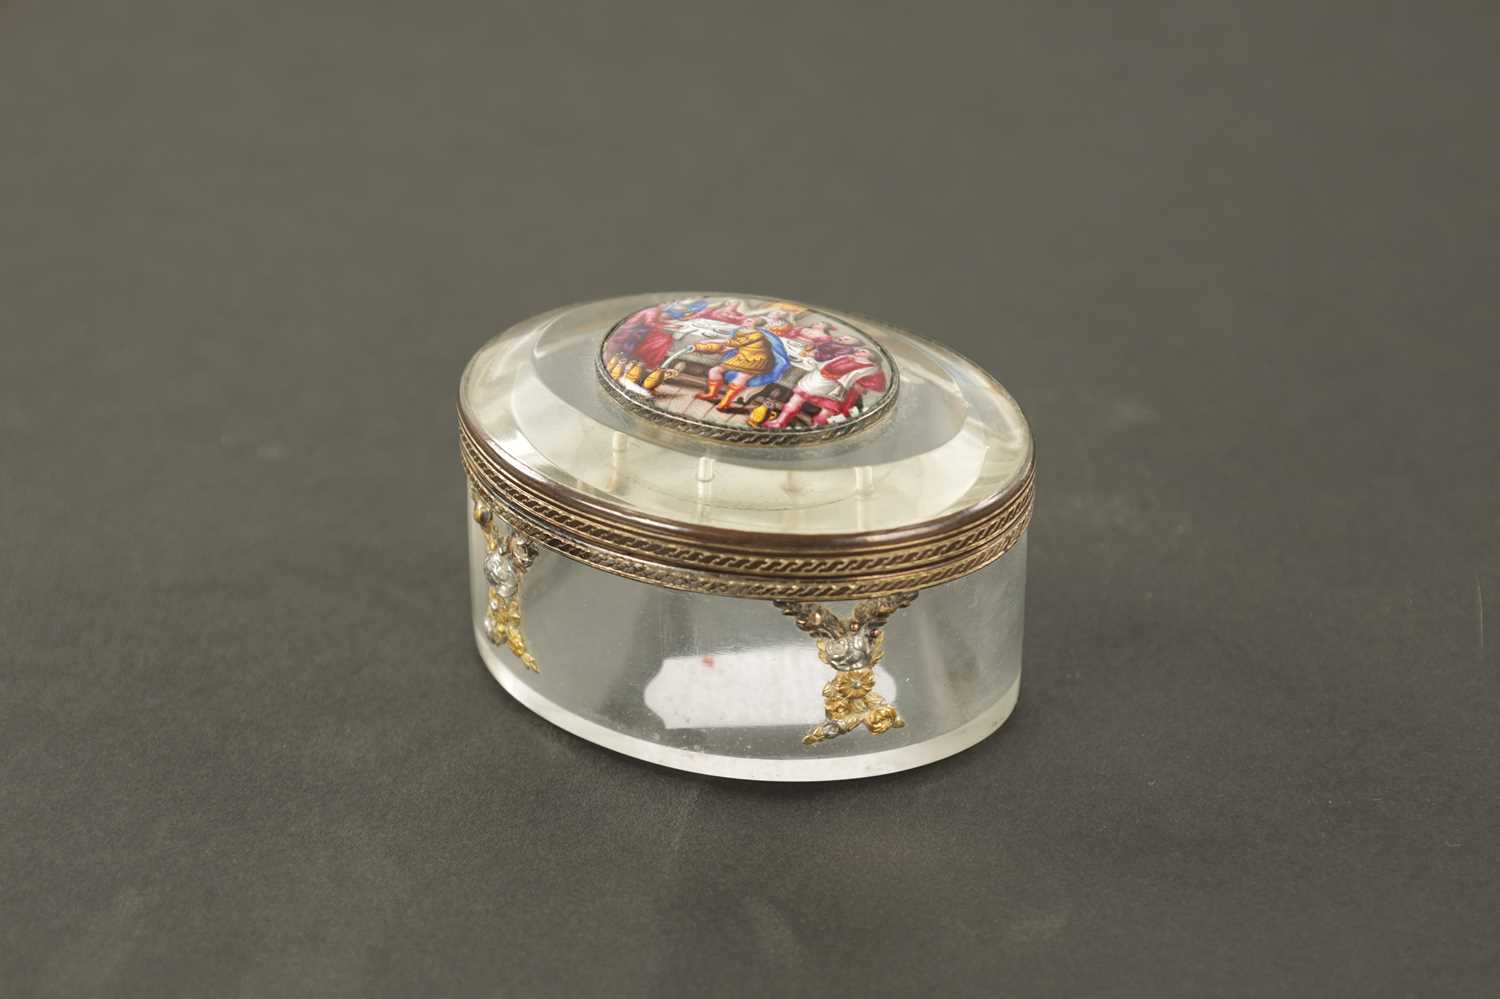 A 19TH CENTURY CONTINENTAL GLASS AND ENAMEL ORMOLU-MOUNTED PILL BOX - Image 3 of 6